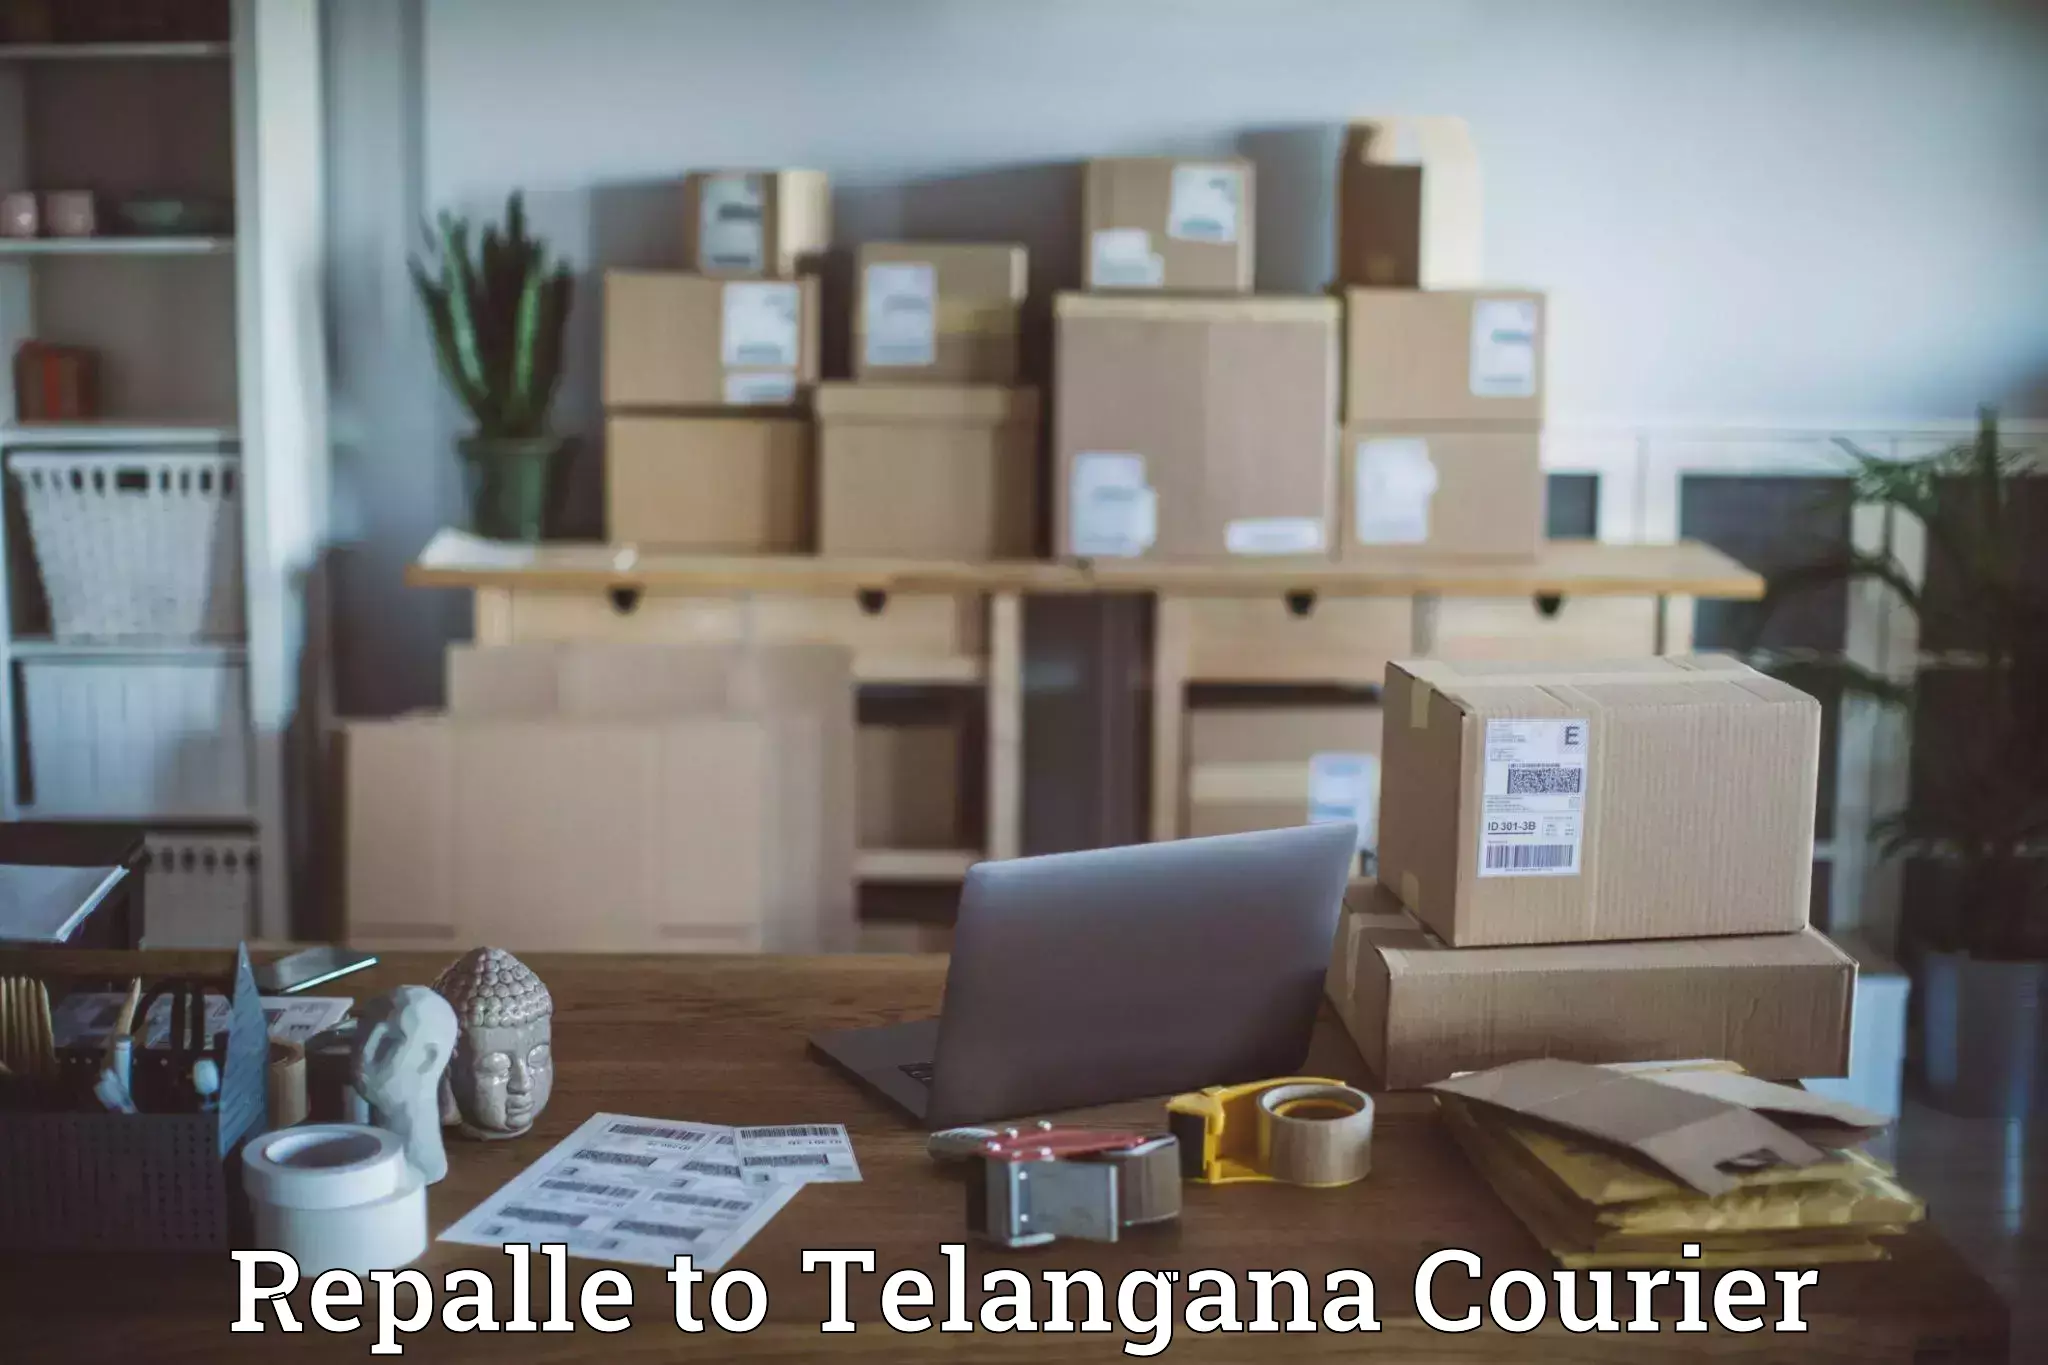 Digital courier platforms Repalle to Netrang